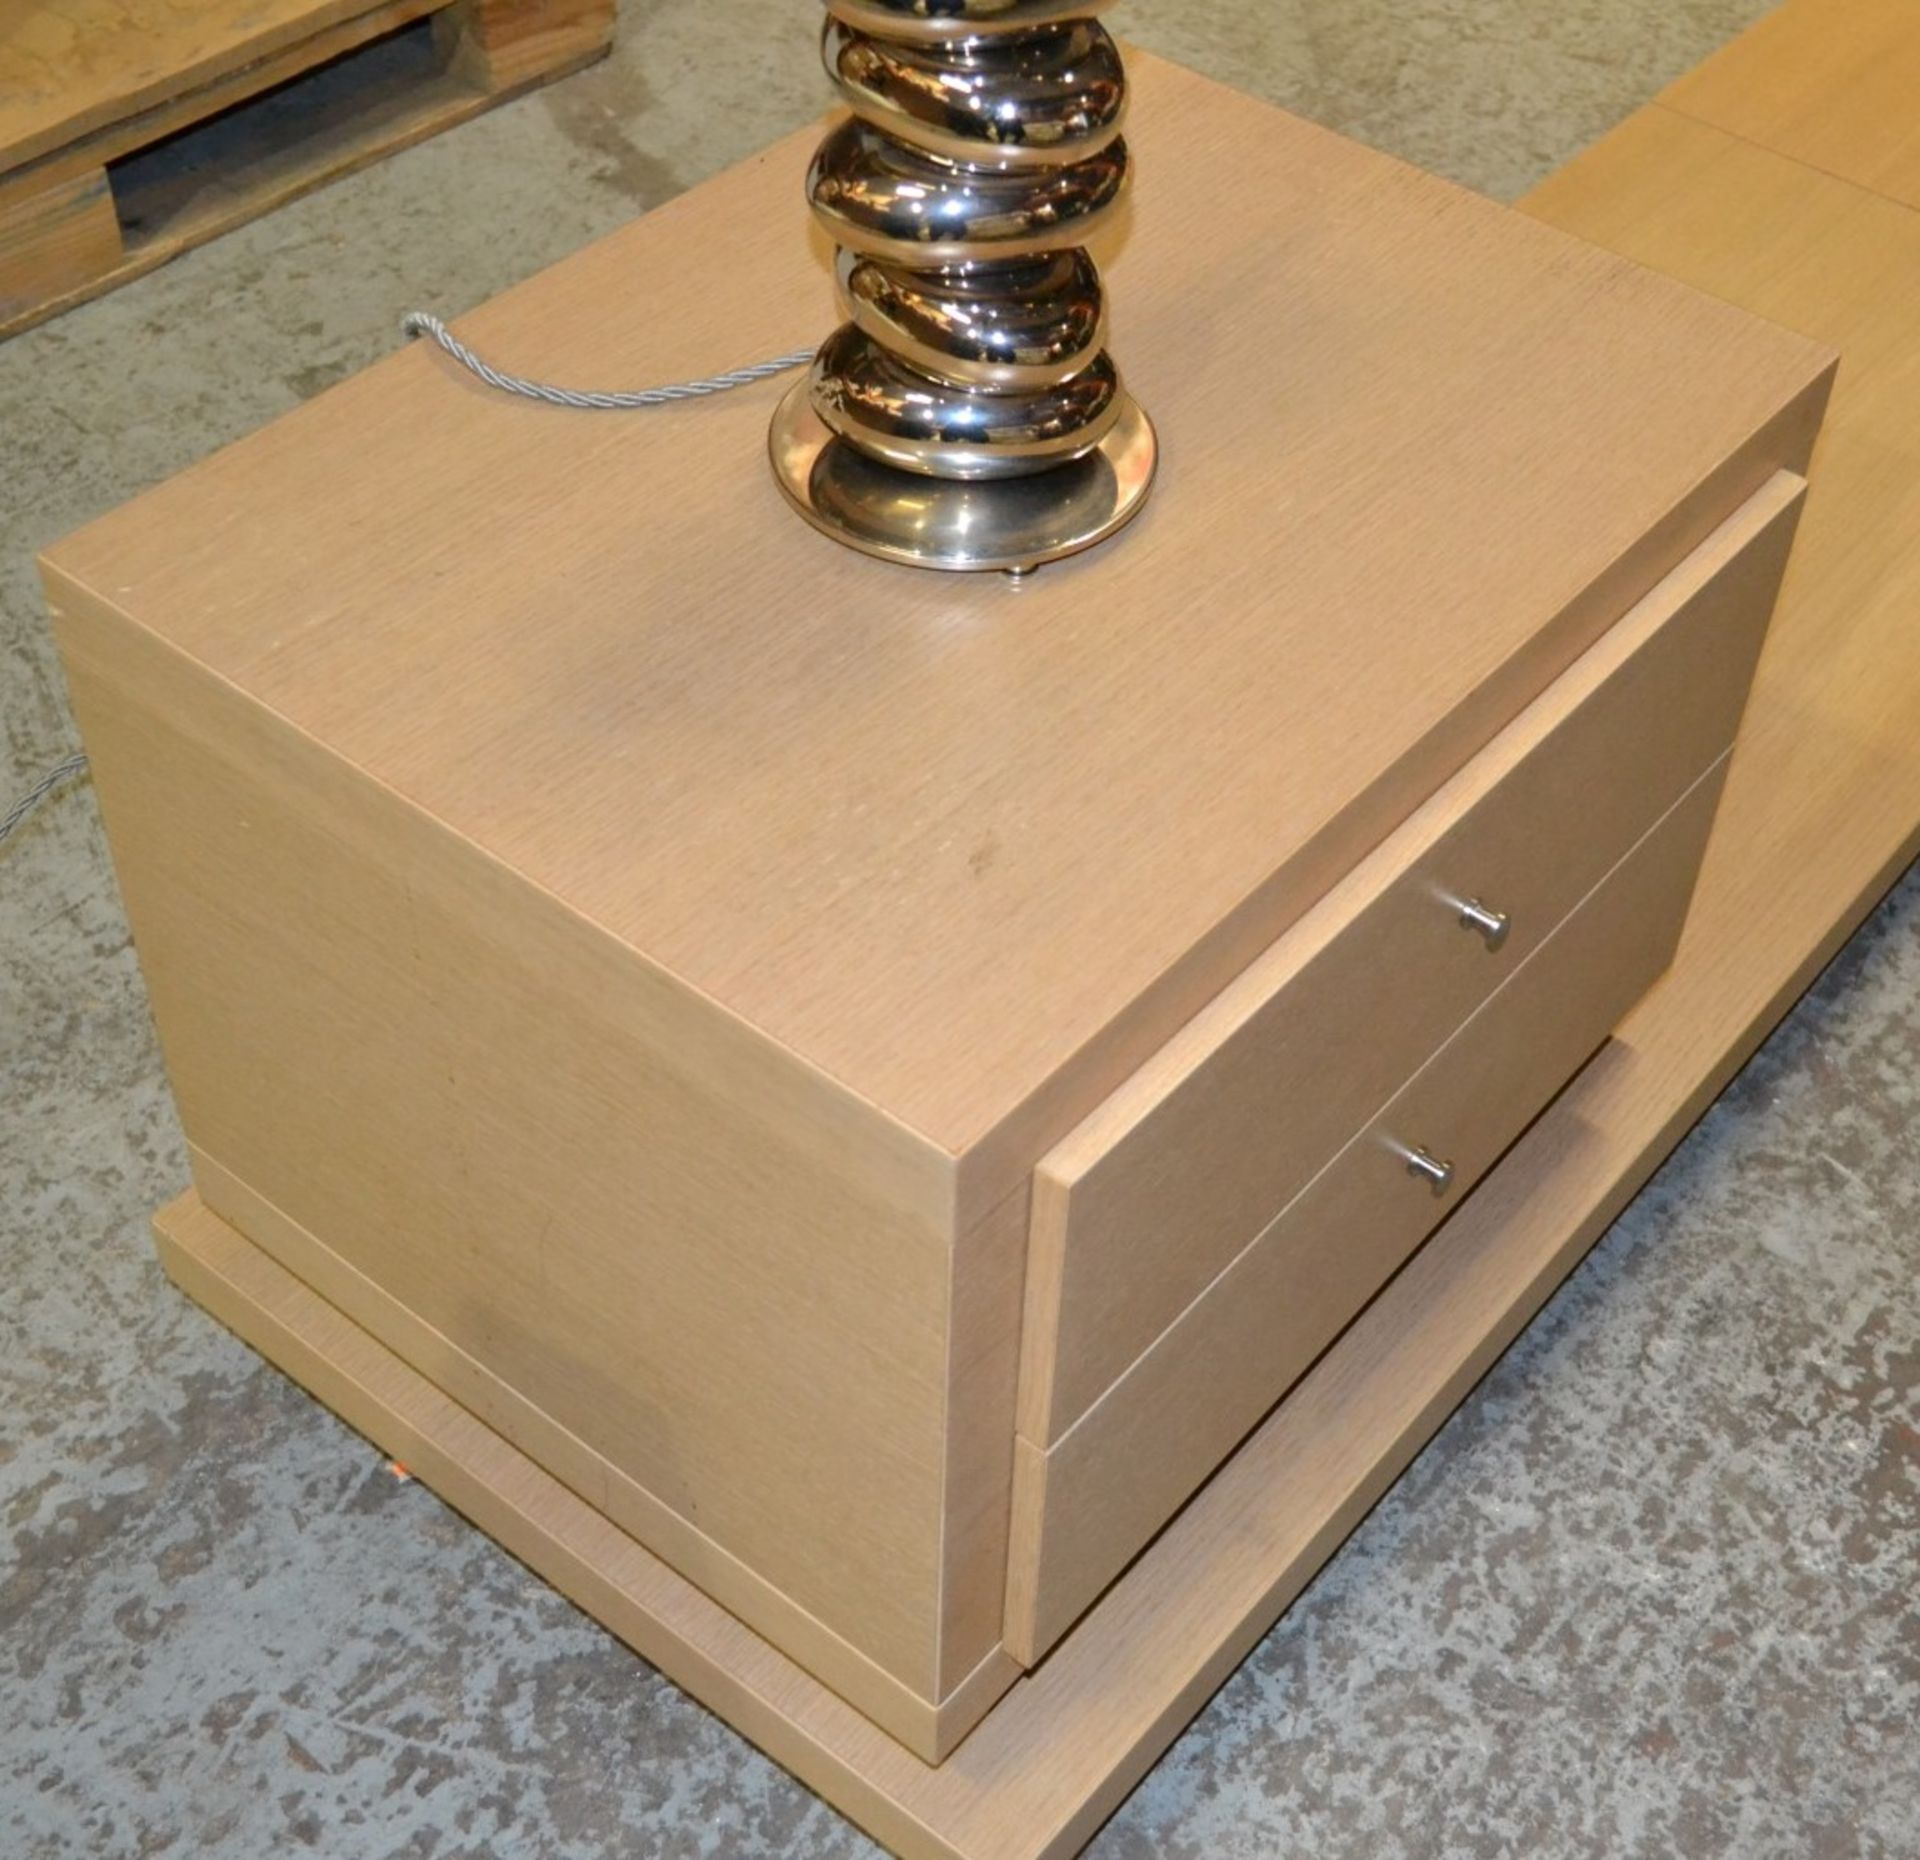 2 x Bedside Cabinets On Underbed Plinth With A Classic Oak Finish - 3 Metres Wide  - Used In Good - Image 5 of 8